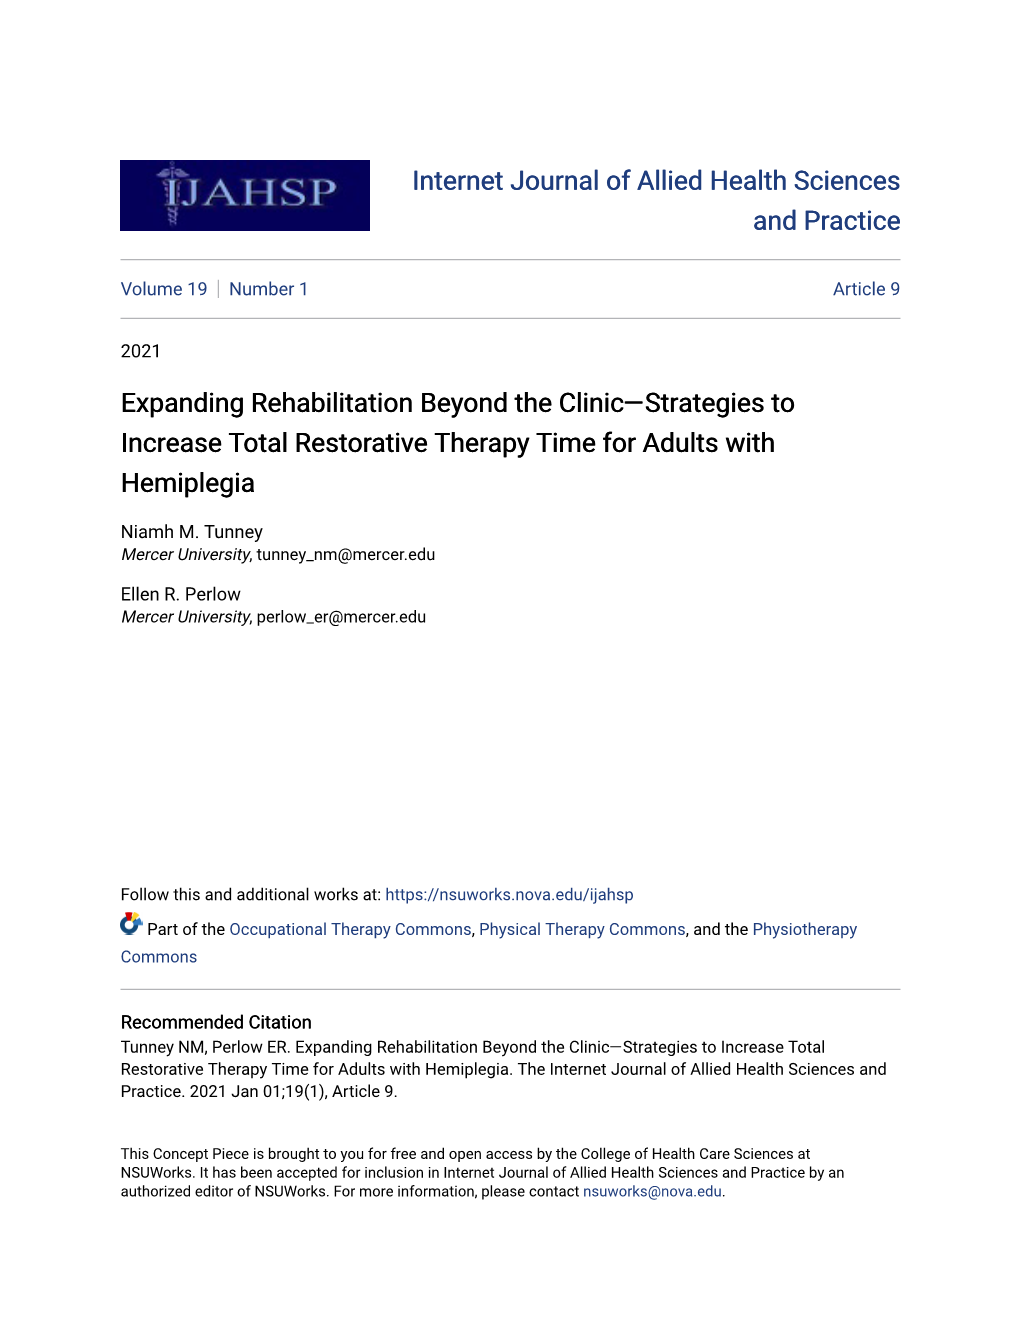 Expanding Rehabilitation Beyond the Clinic—Strategies to Increase Total Restorative Therapy Time for Adults with Hemiplegia